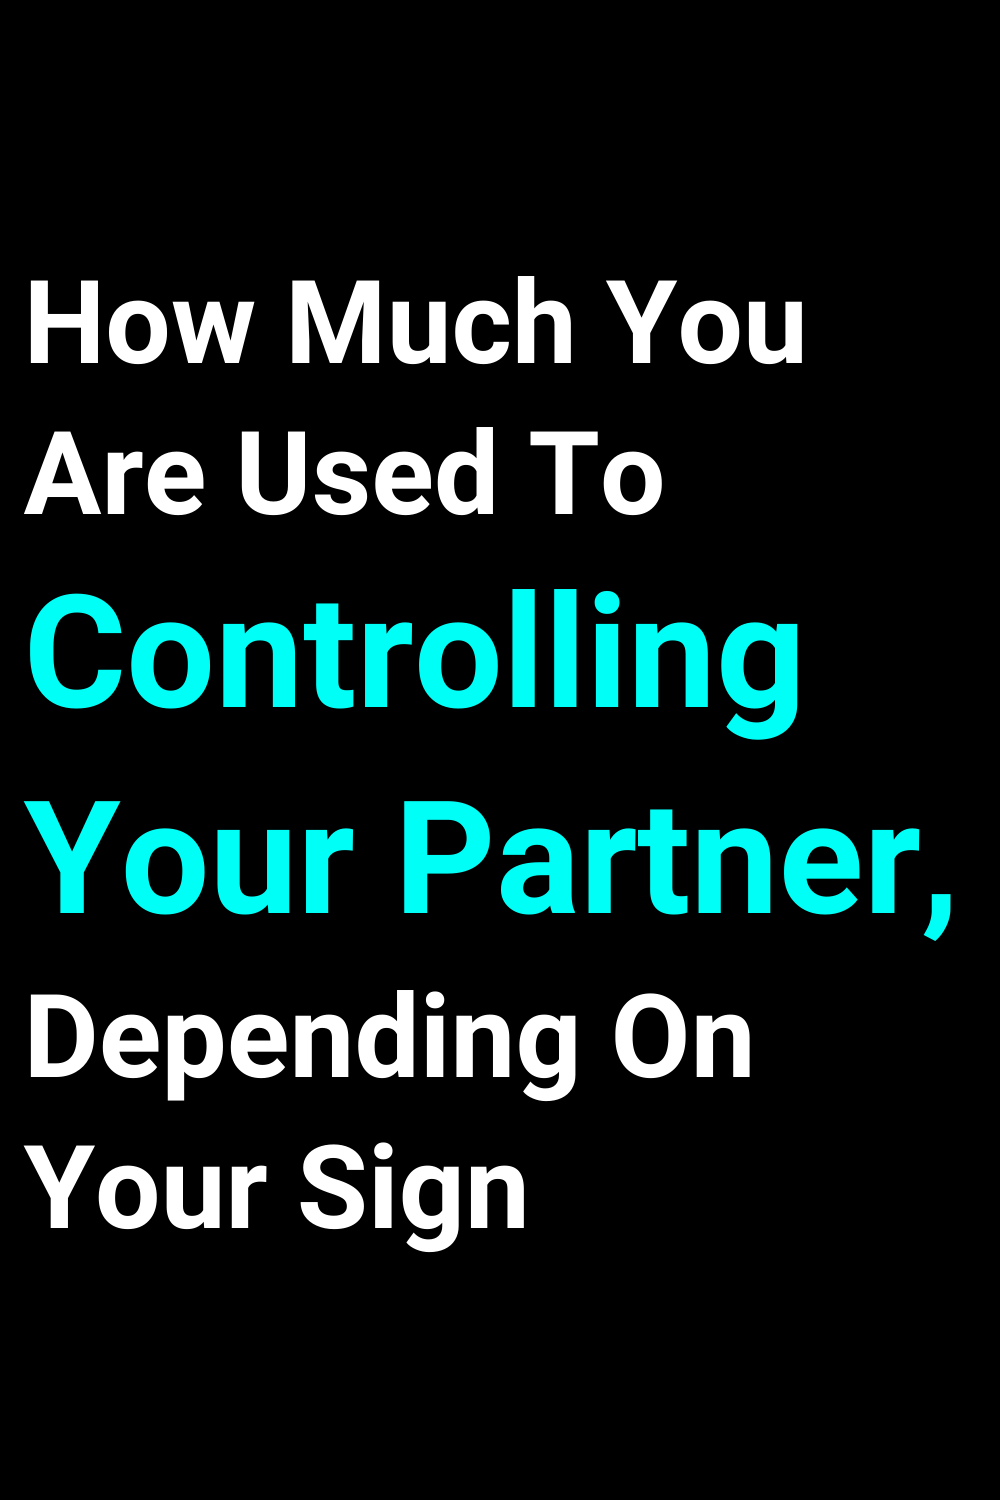 How Much You Are Used To Controlling Your Partner, Depending On Your Sign